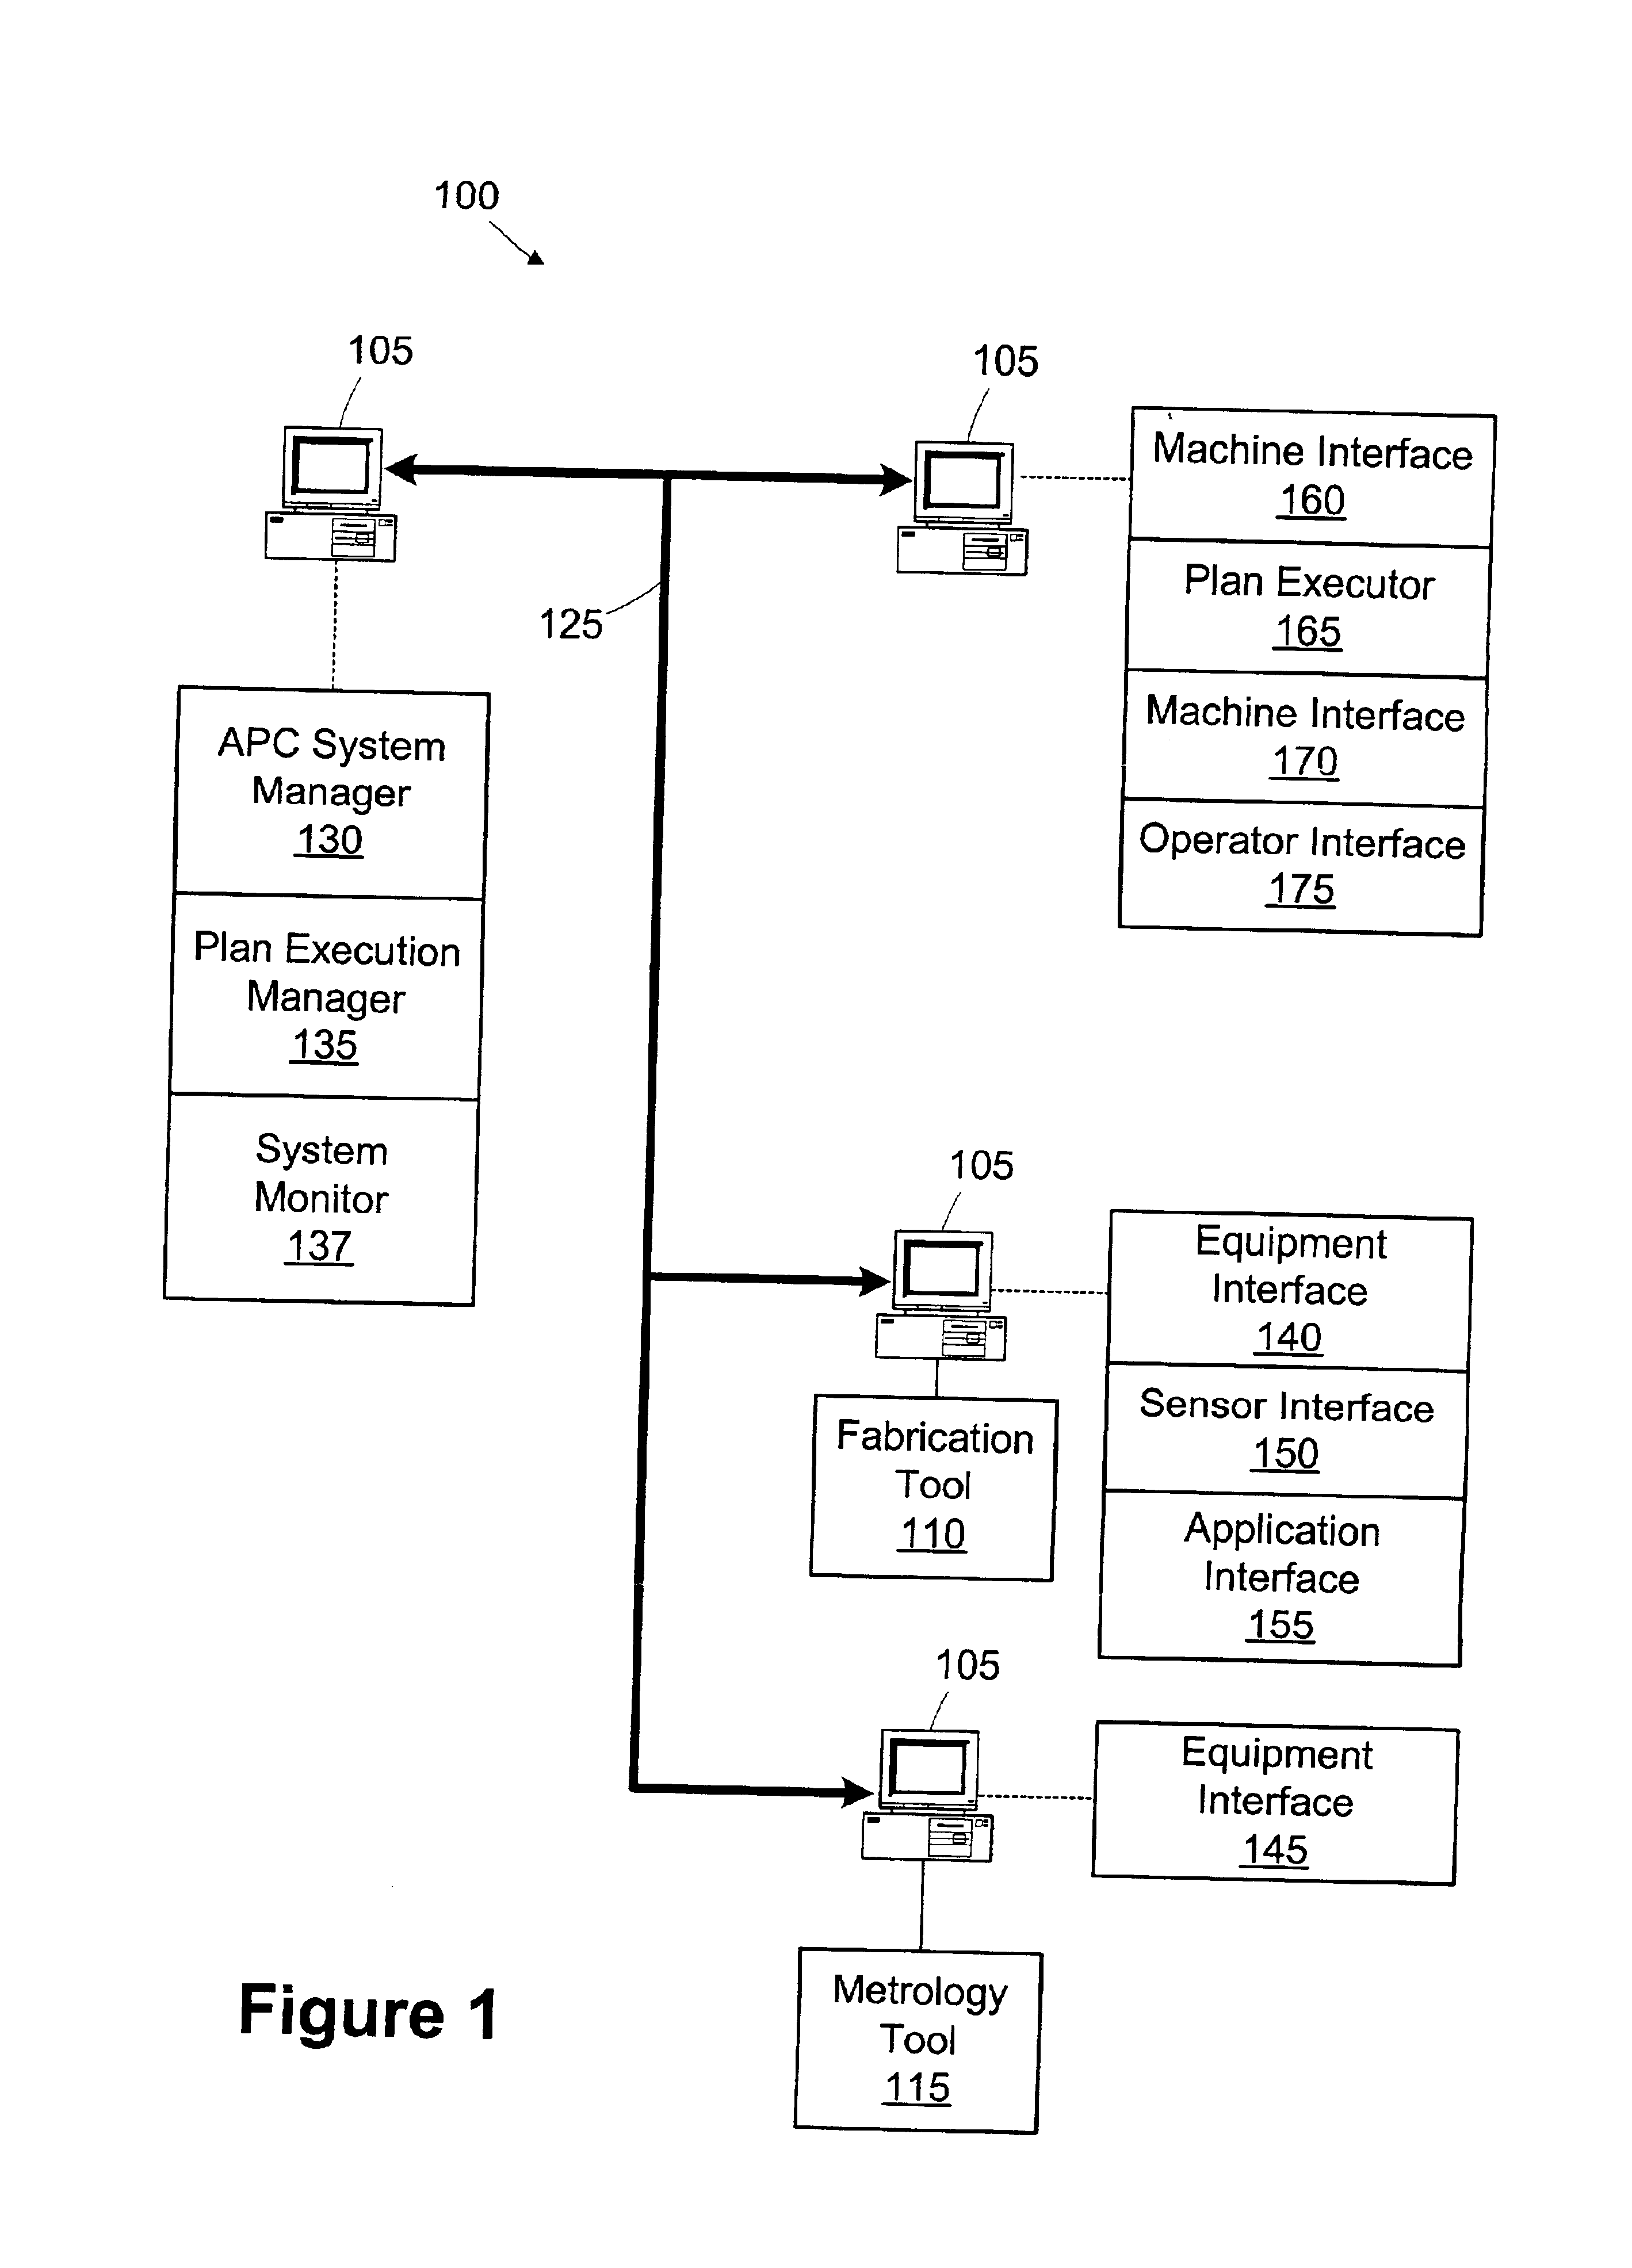 Method and apparatus for dynamically monitoring system components in an advanced process control (APC) framework